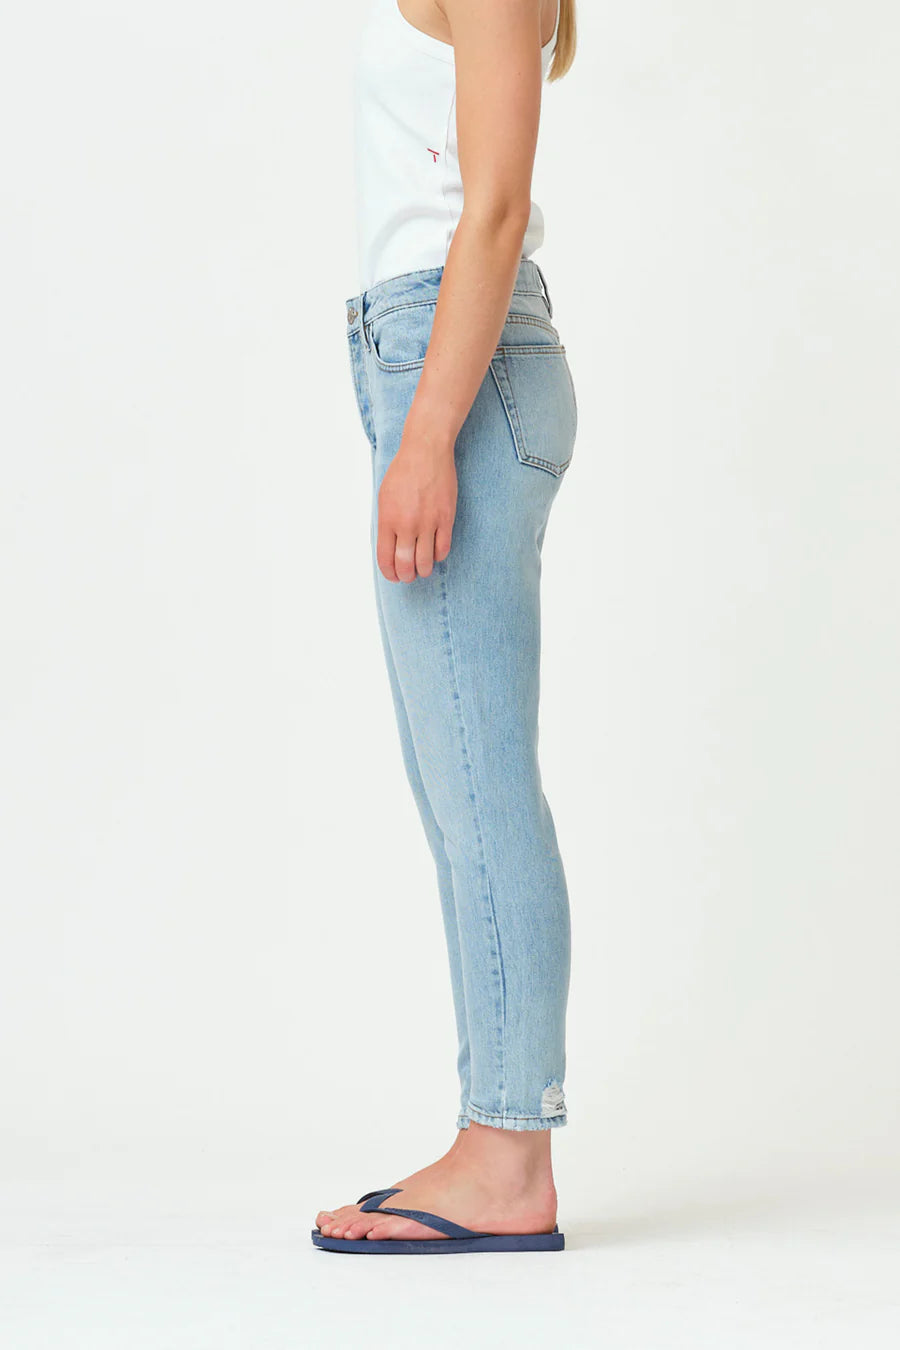 A woman in a white tank top and Hepburn Slim Jeans - Versailles Dist. by Tomorrow Denim, standing in front of a white wall.